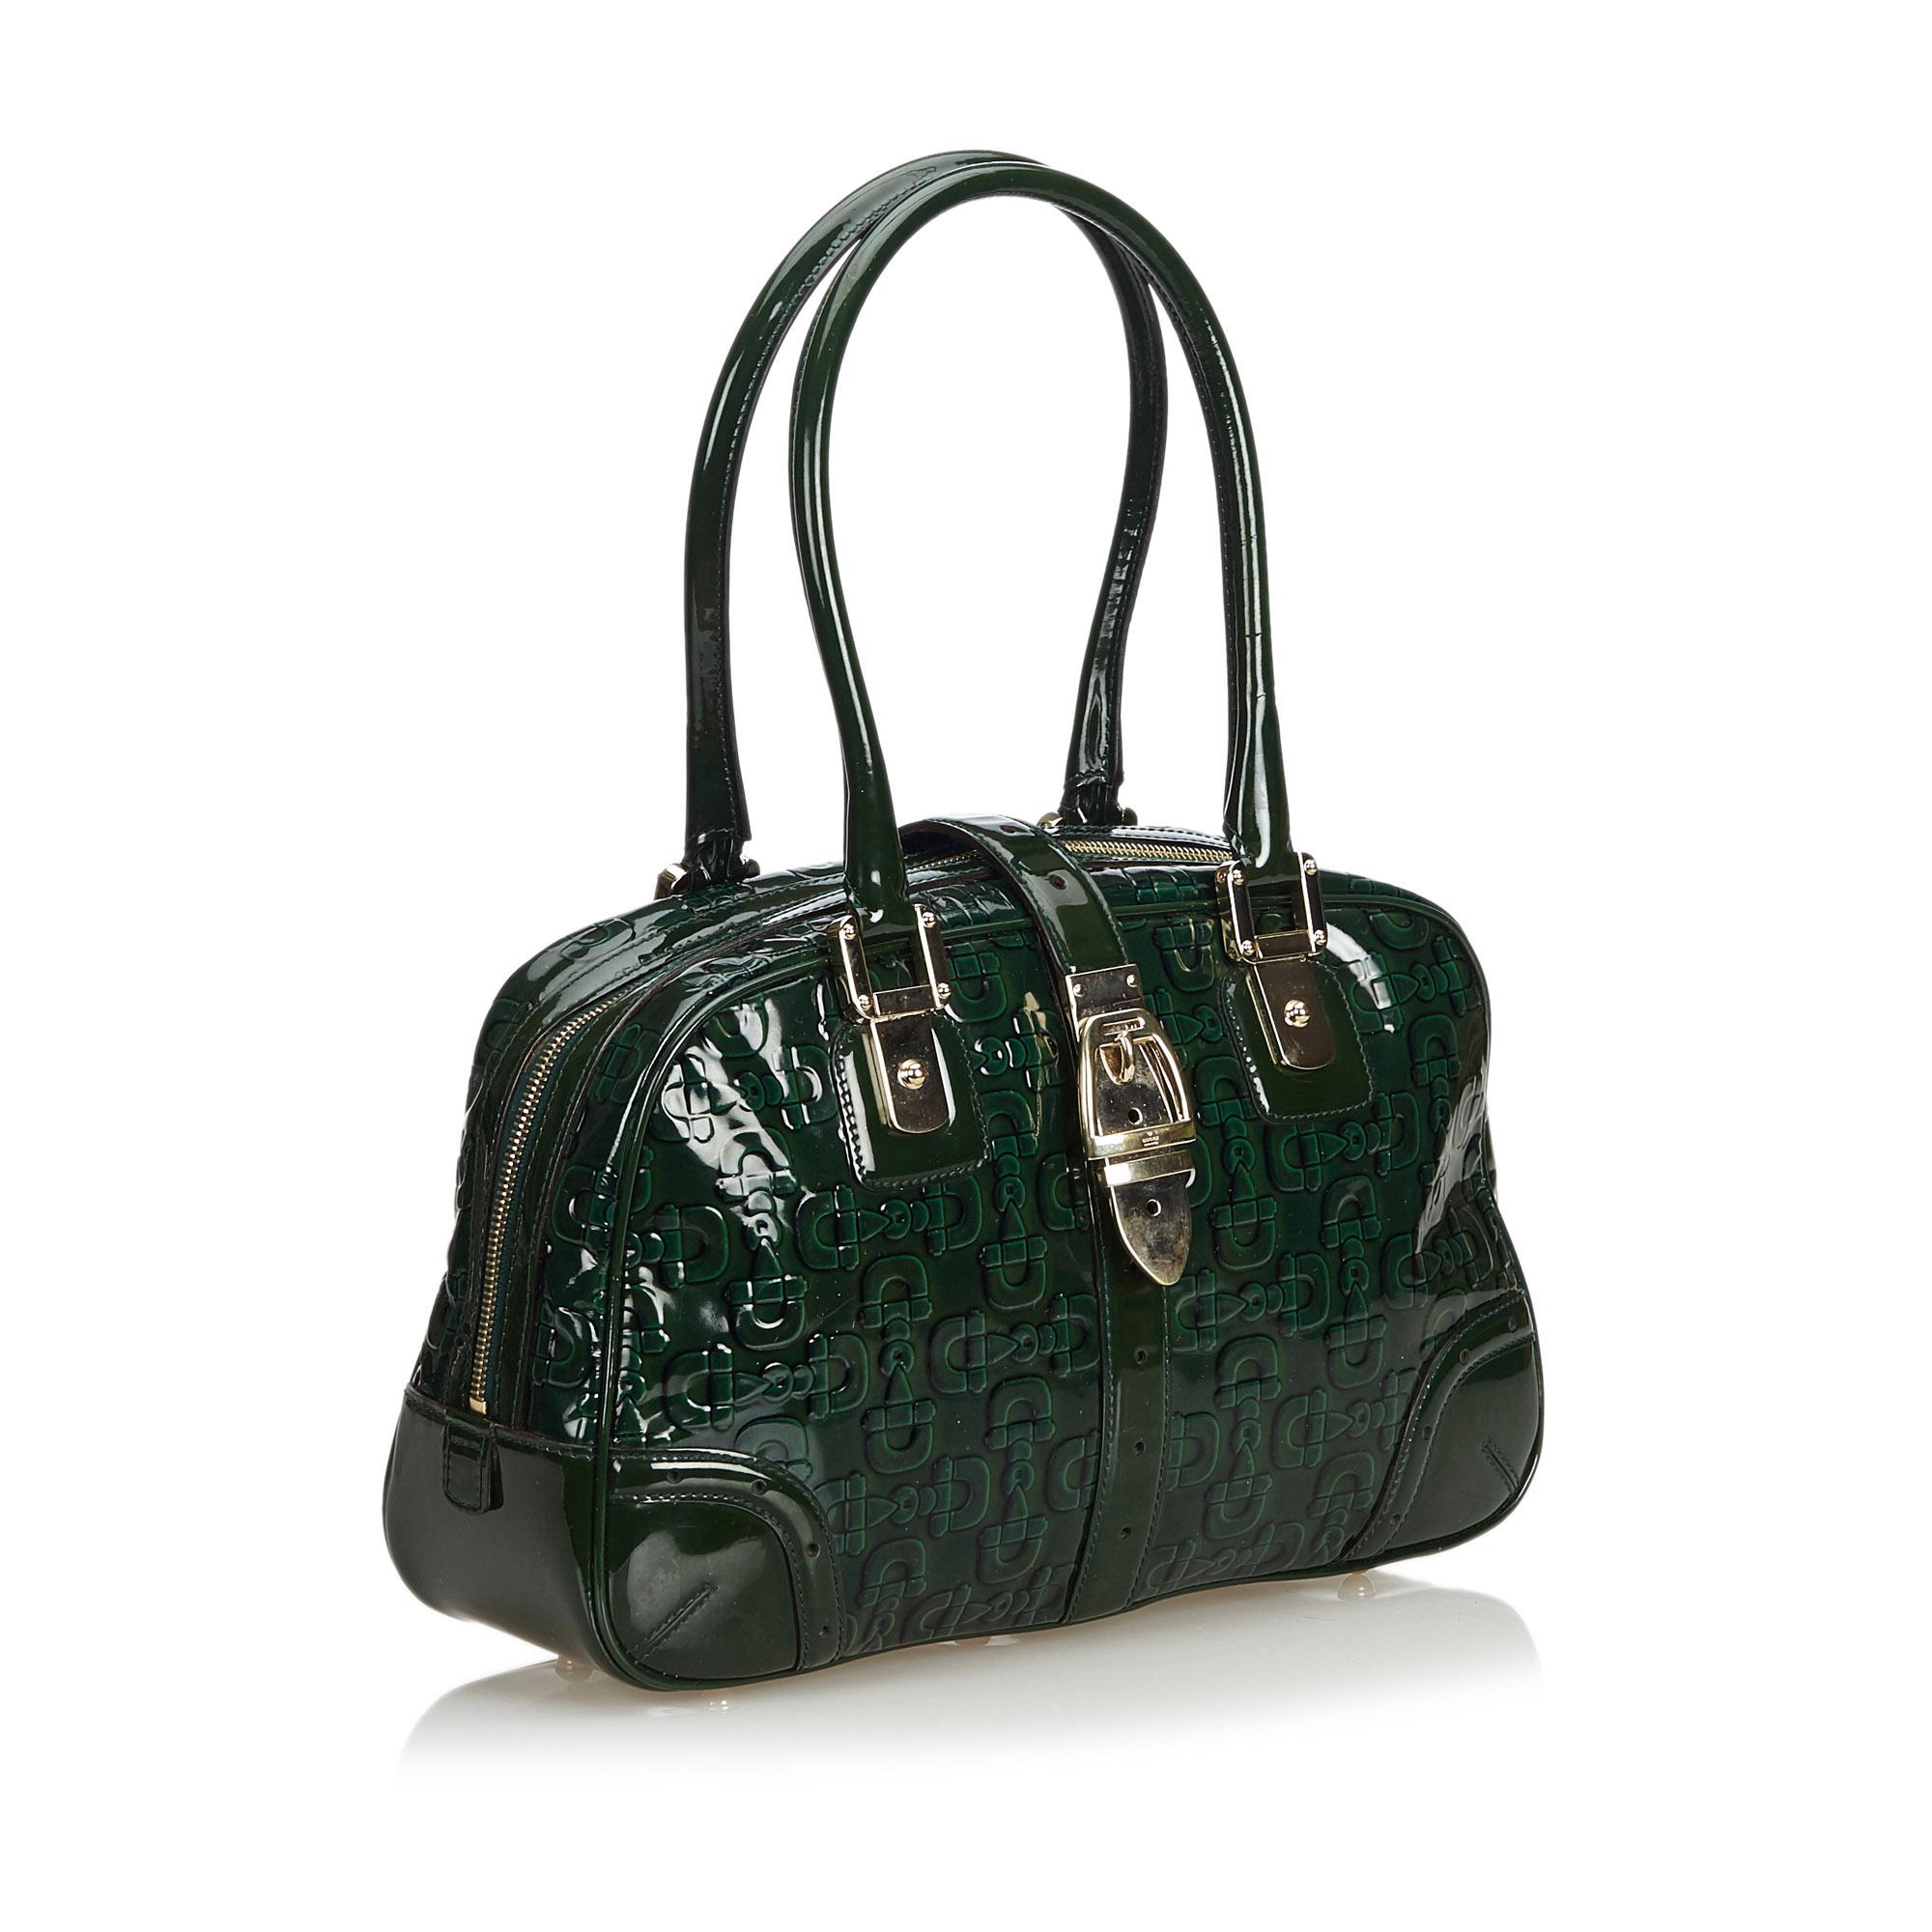 This shoulder bag features an embossed patent leather body with a horse bit pattern, rolled straps, a top strap with a belt buckle detail, a top zip closure, and an interior zip pocket. It carries as AB condition rating.

Inclusions: 
This item does